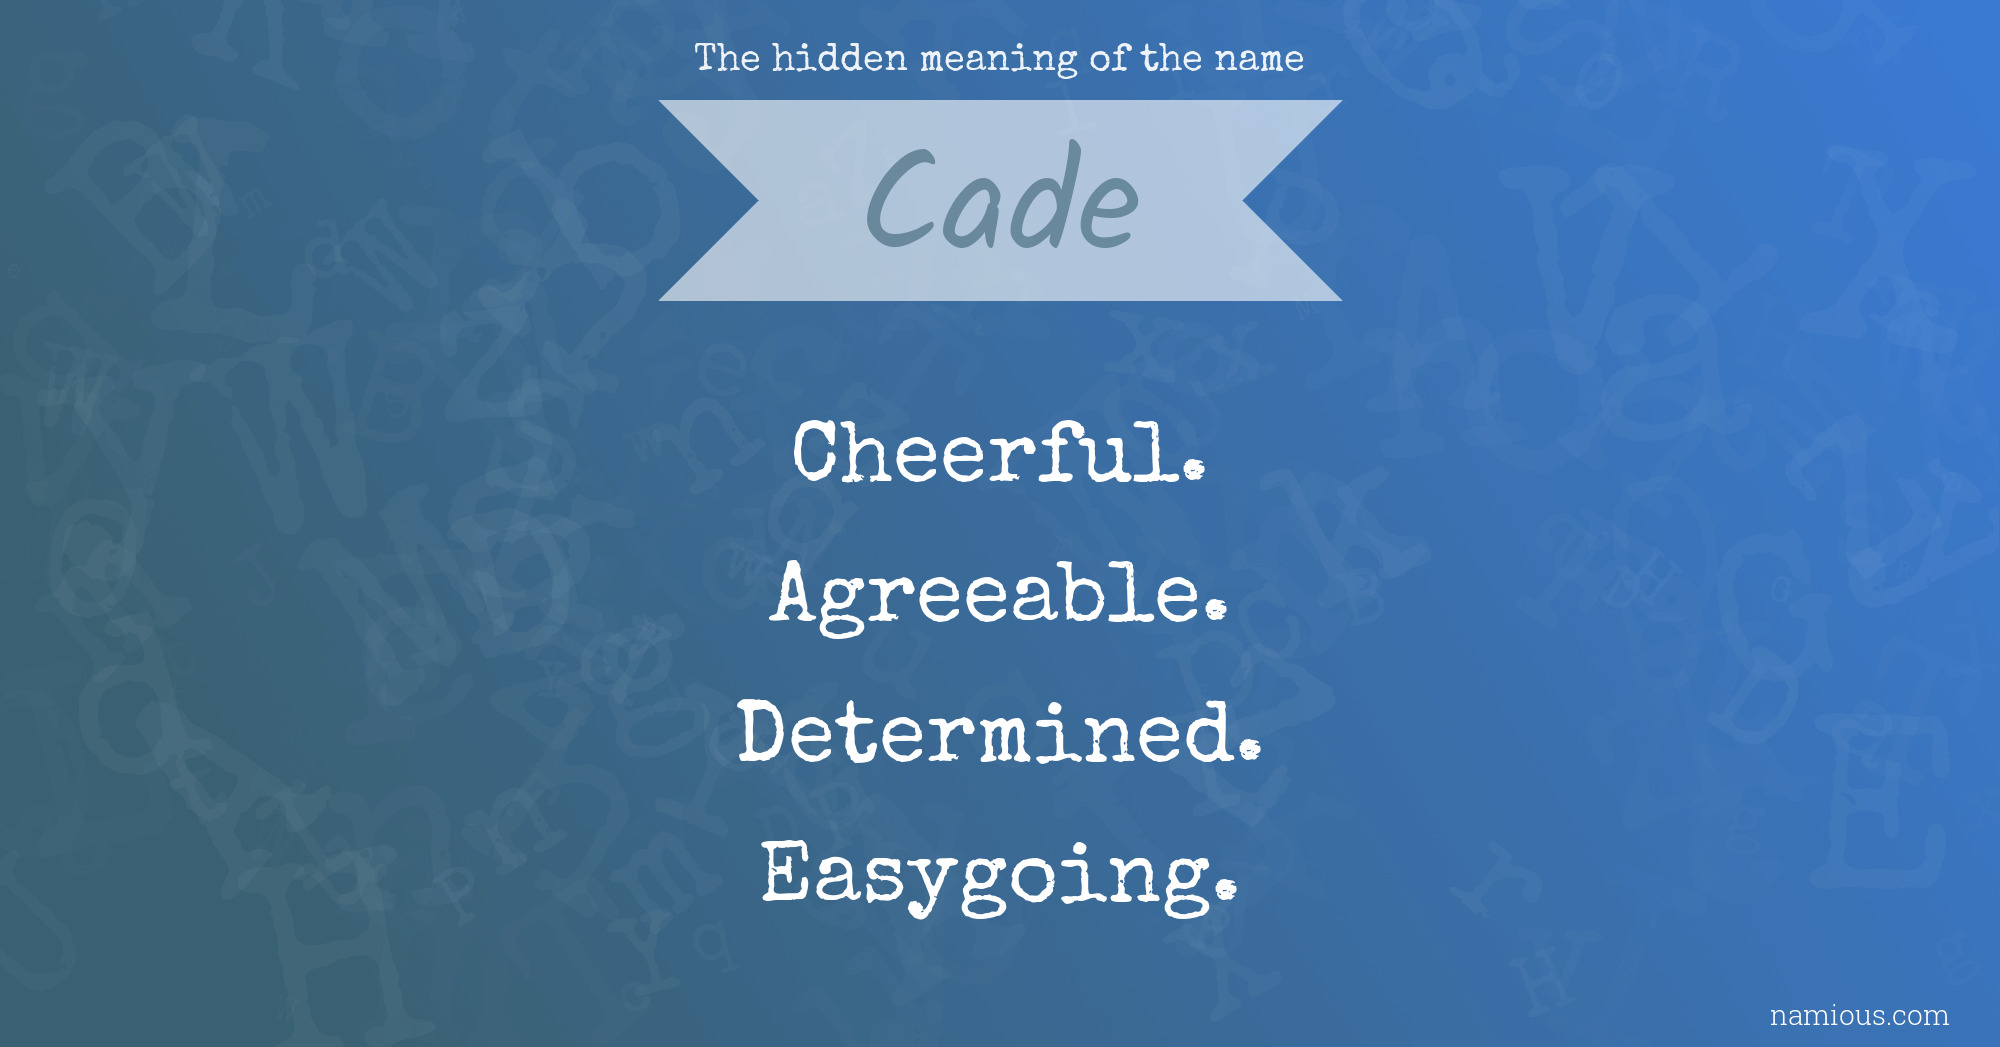 The hidden meaning of the name Cade